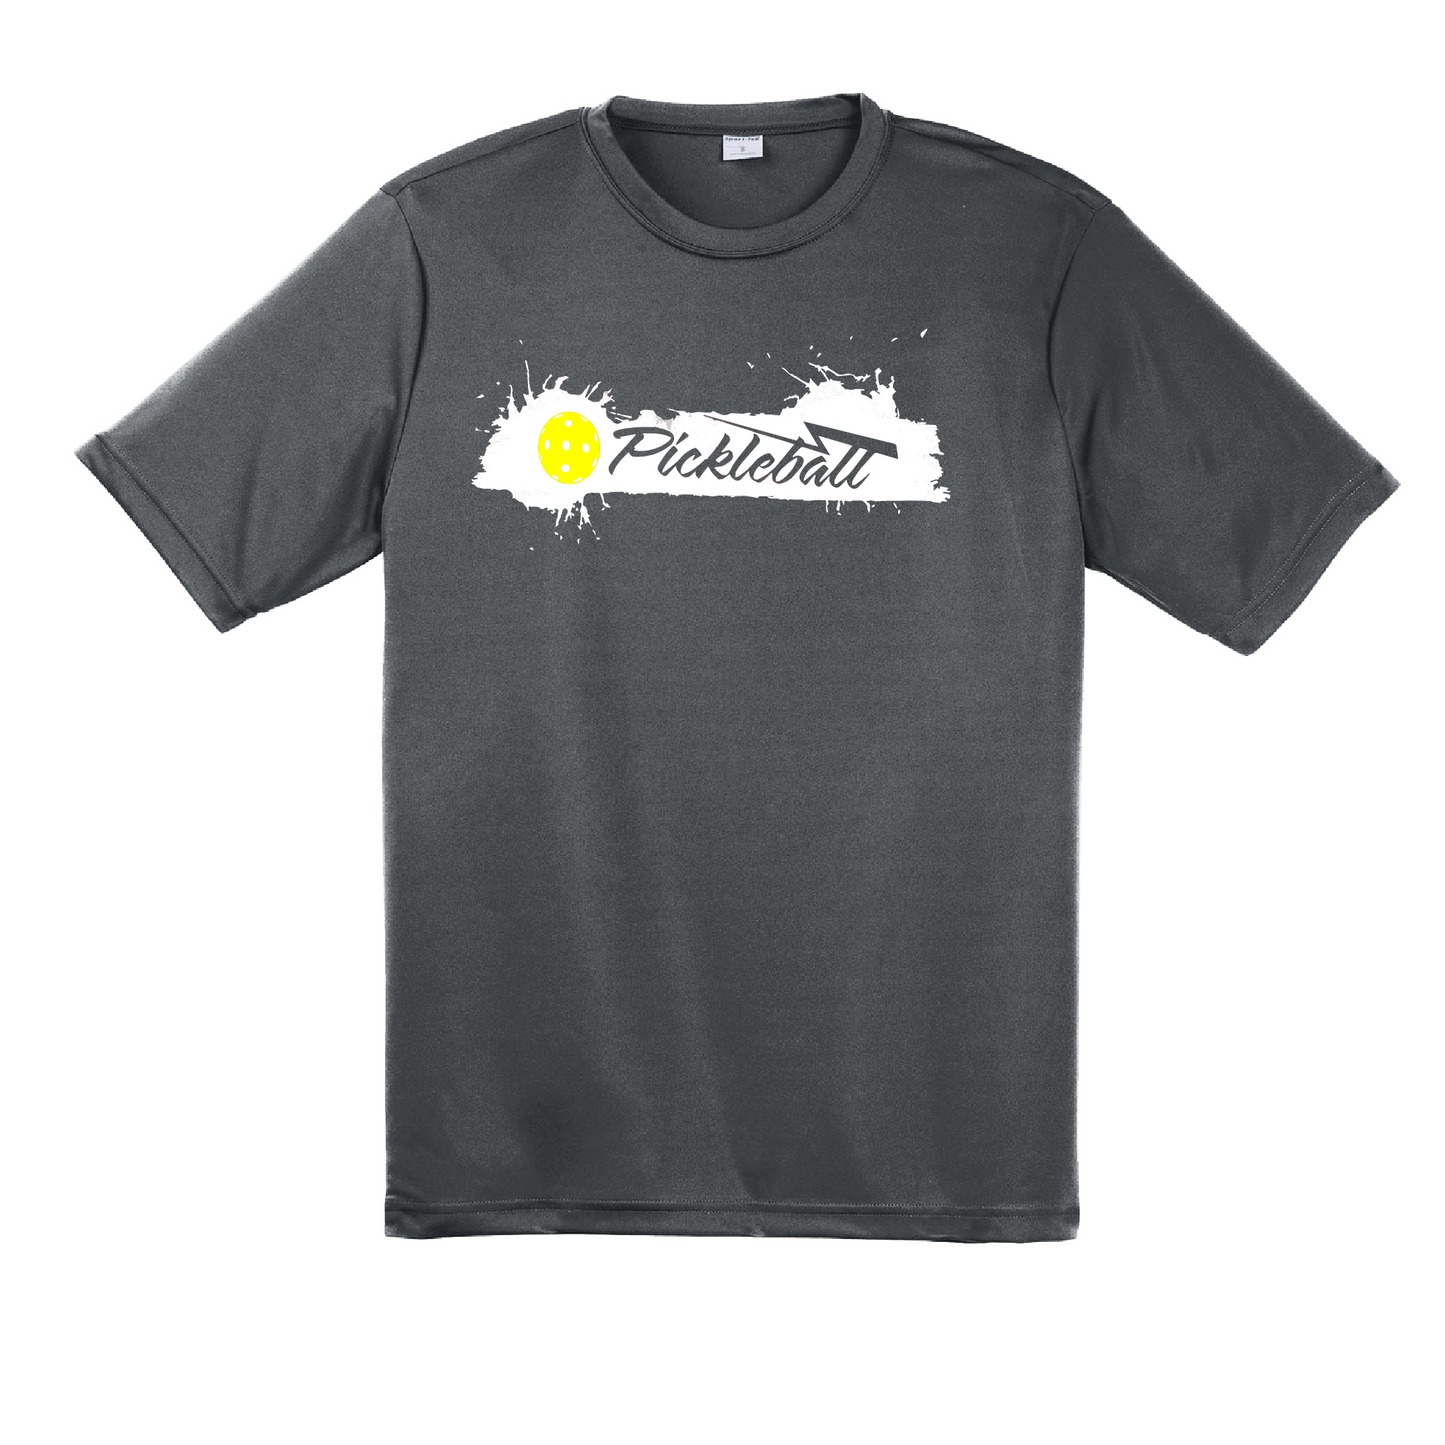 Pickleball Design: Extreme  Men's Style: Short Sleeved   Shirts are lightweight, roomy and highly breathable. These moisture-wicking shirts are designed for athletic performance. They feature PosiCharge technology to lock in color and prevent logos from fading. Removable tag and set-in sleeves for comfort.